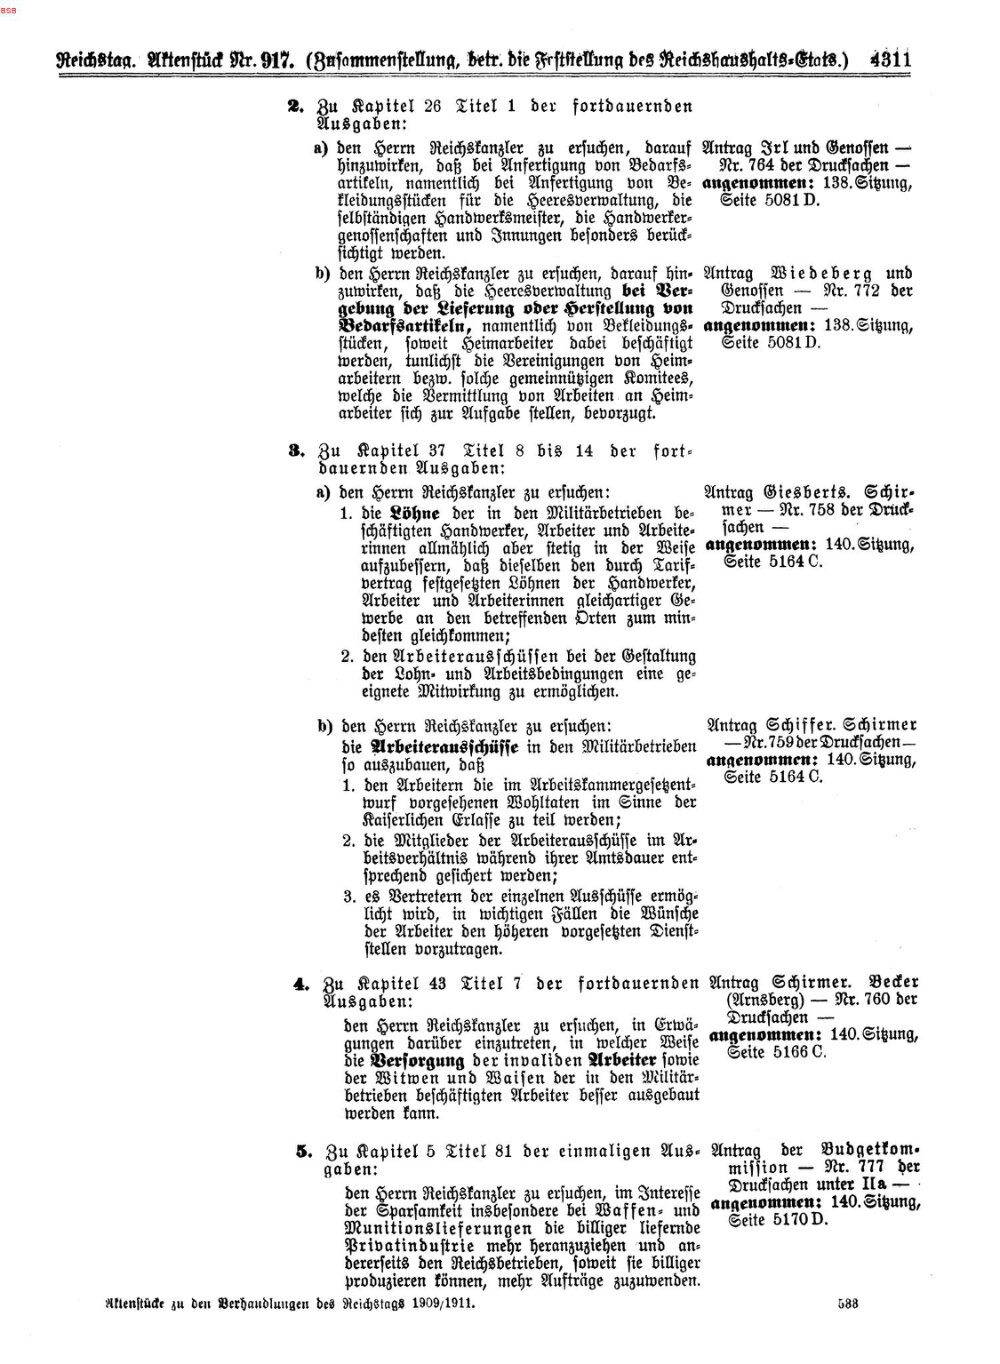 Scan of page 4311